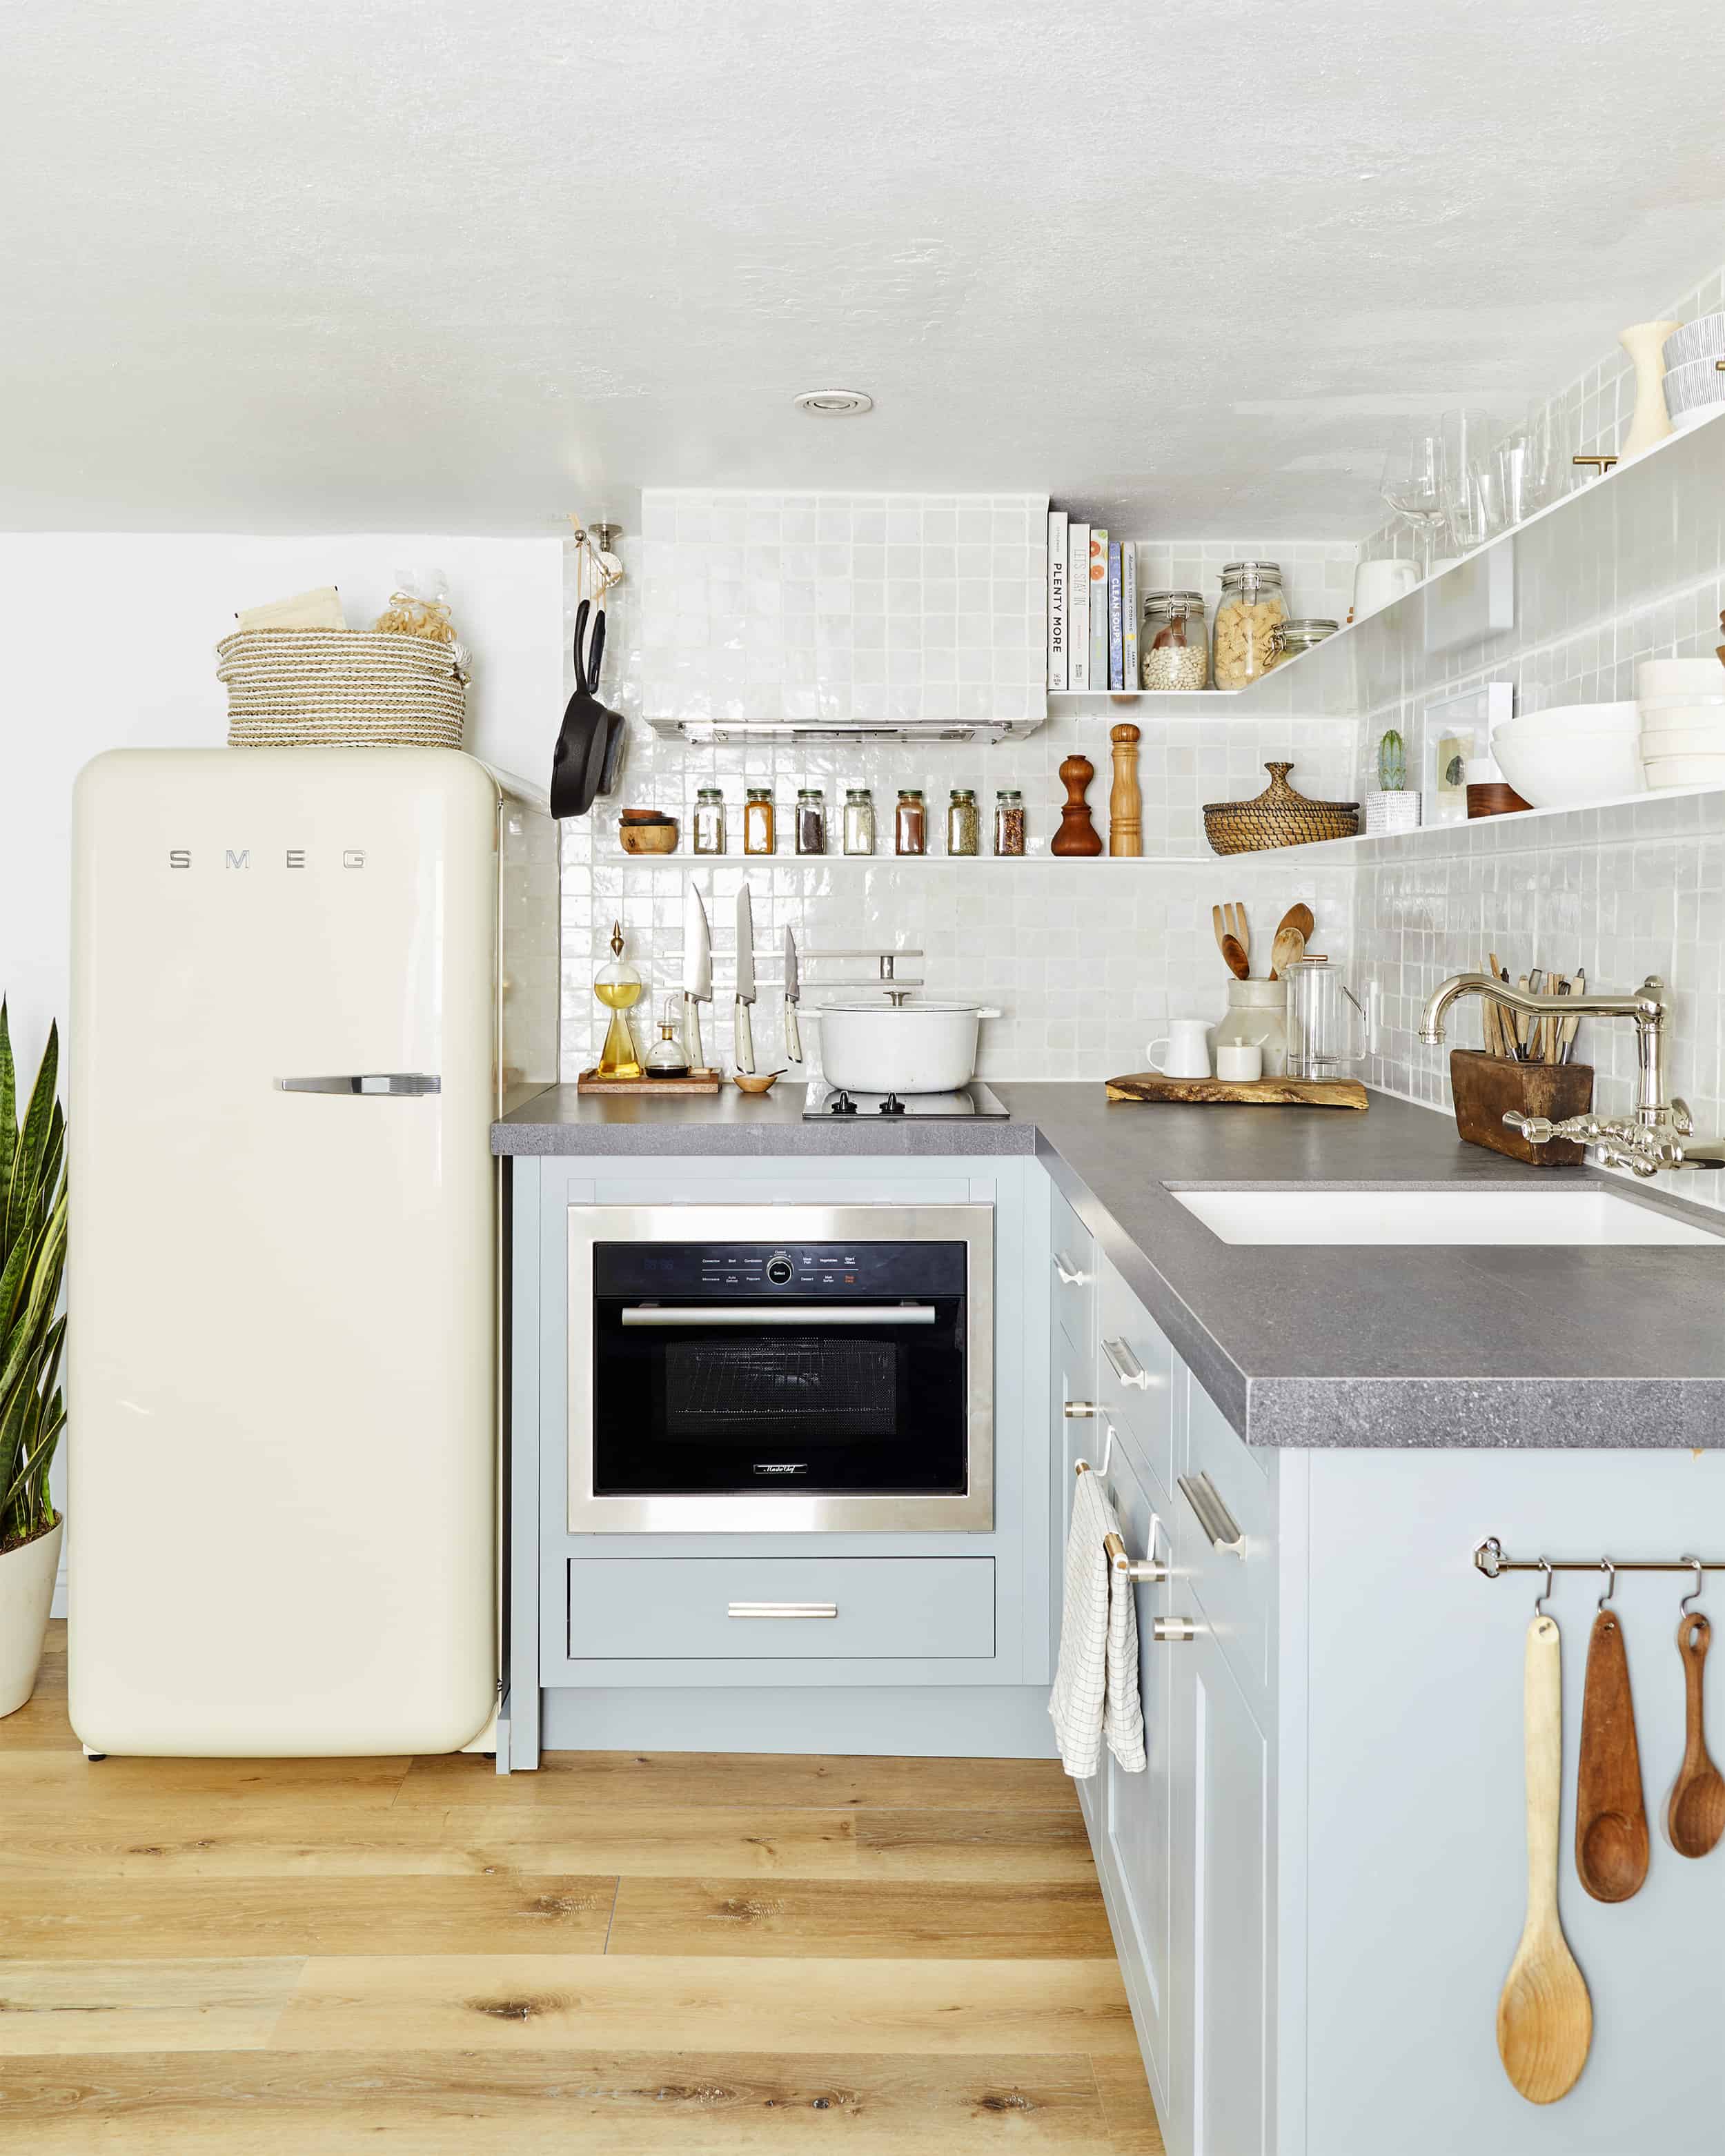 Designing for Small Kitchens: Stacking and Nesting Storage - Core77